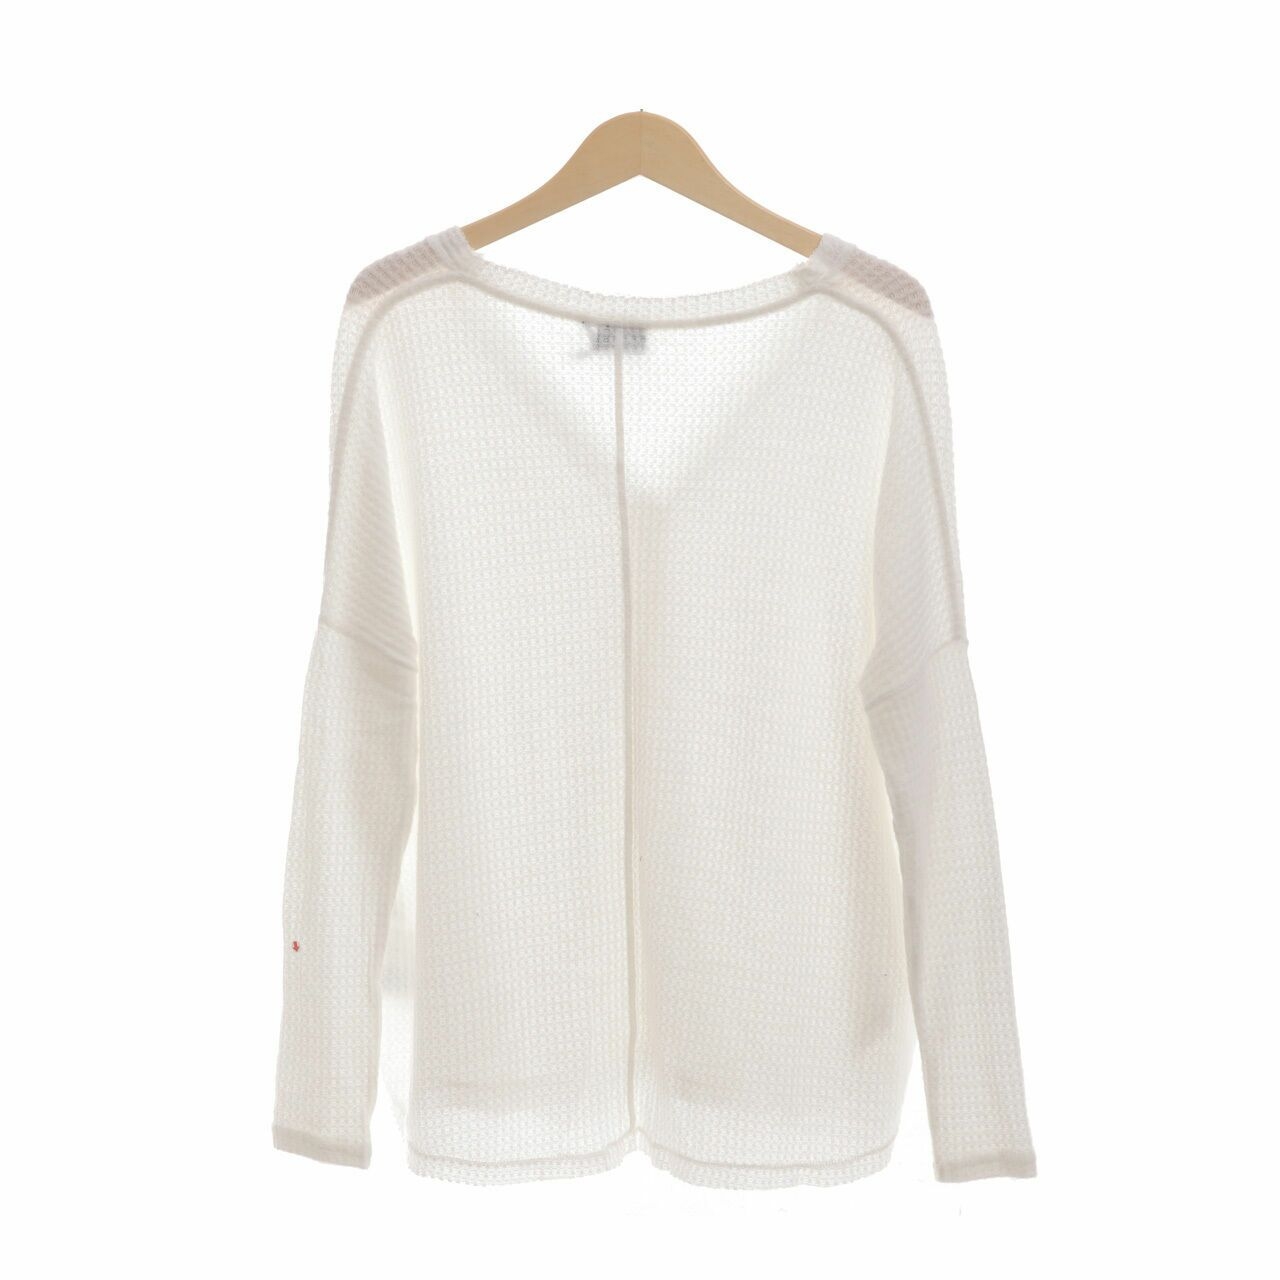 Urban Outfitters White Cardigan